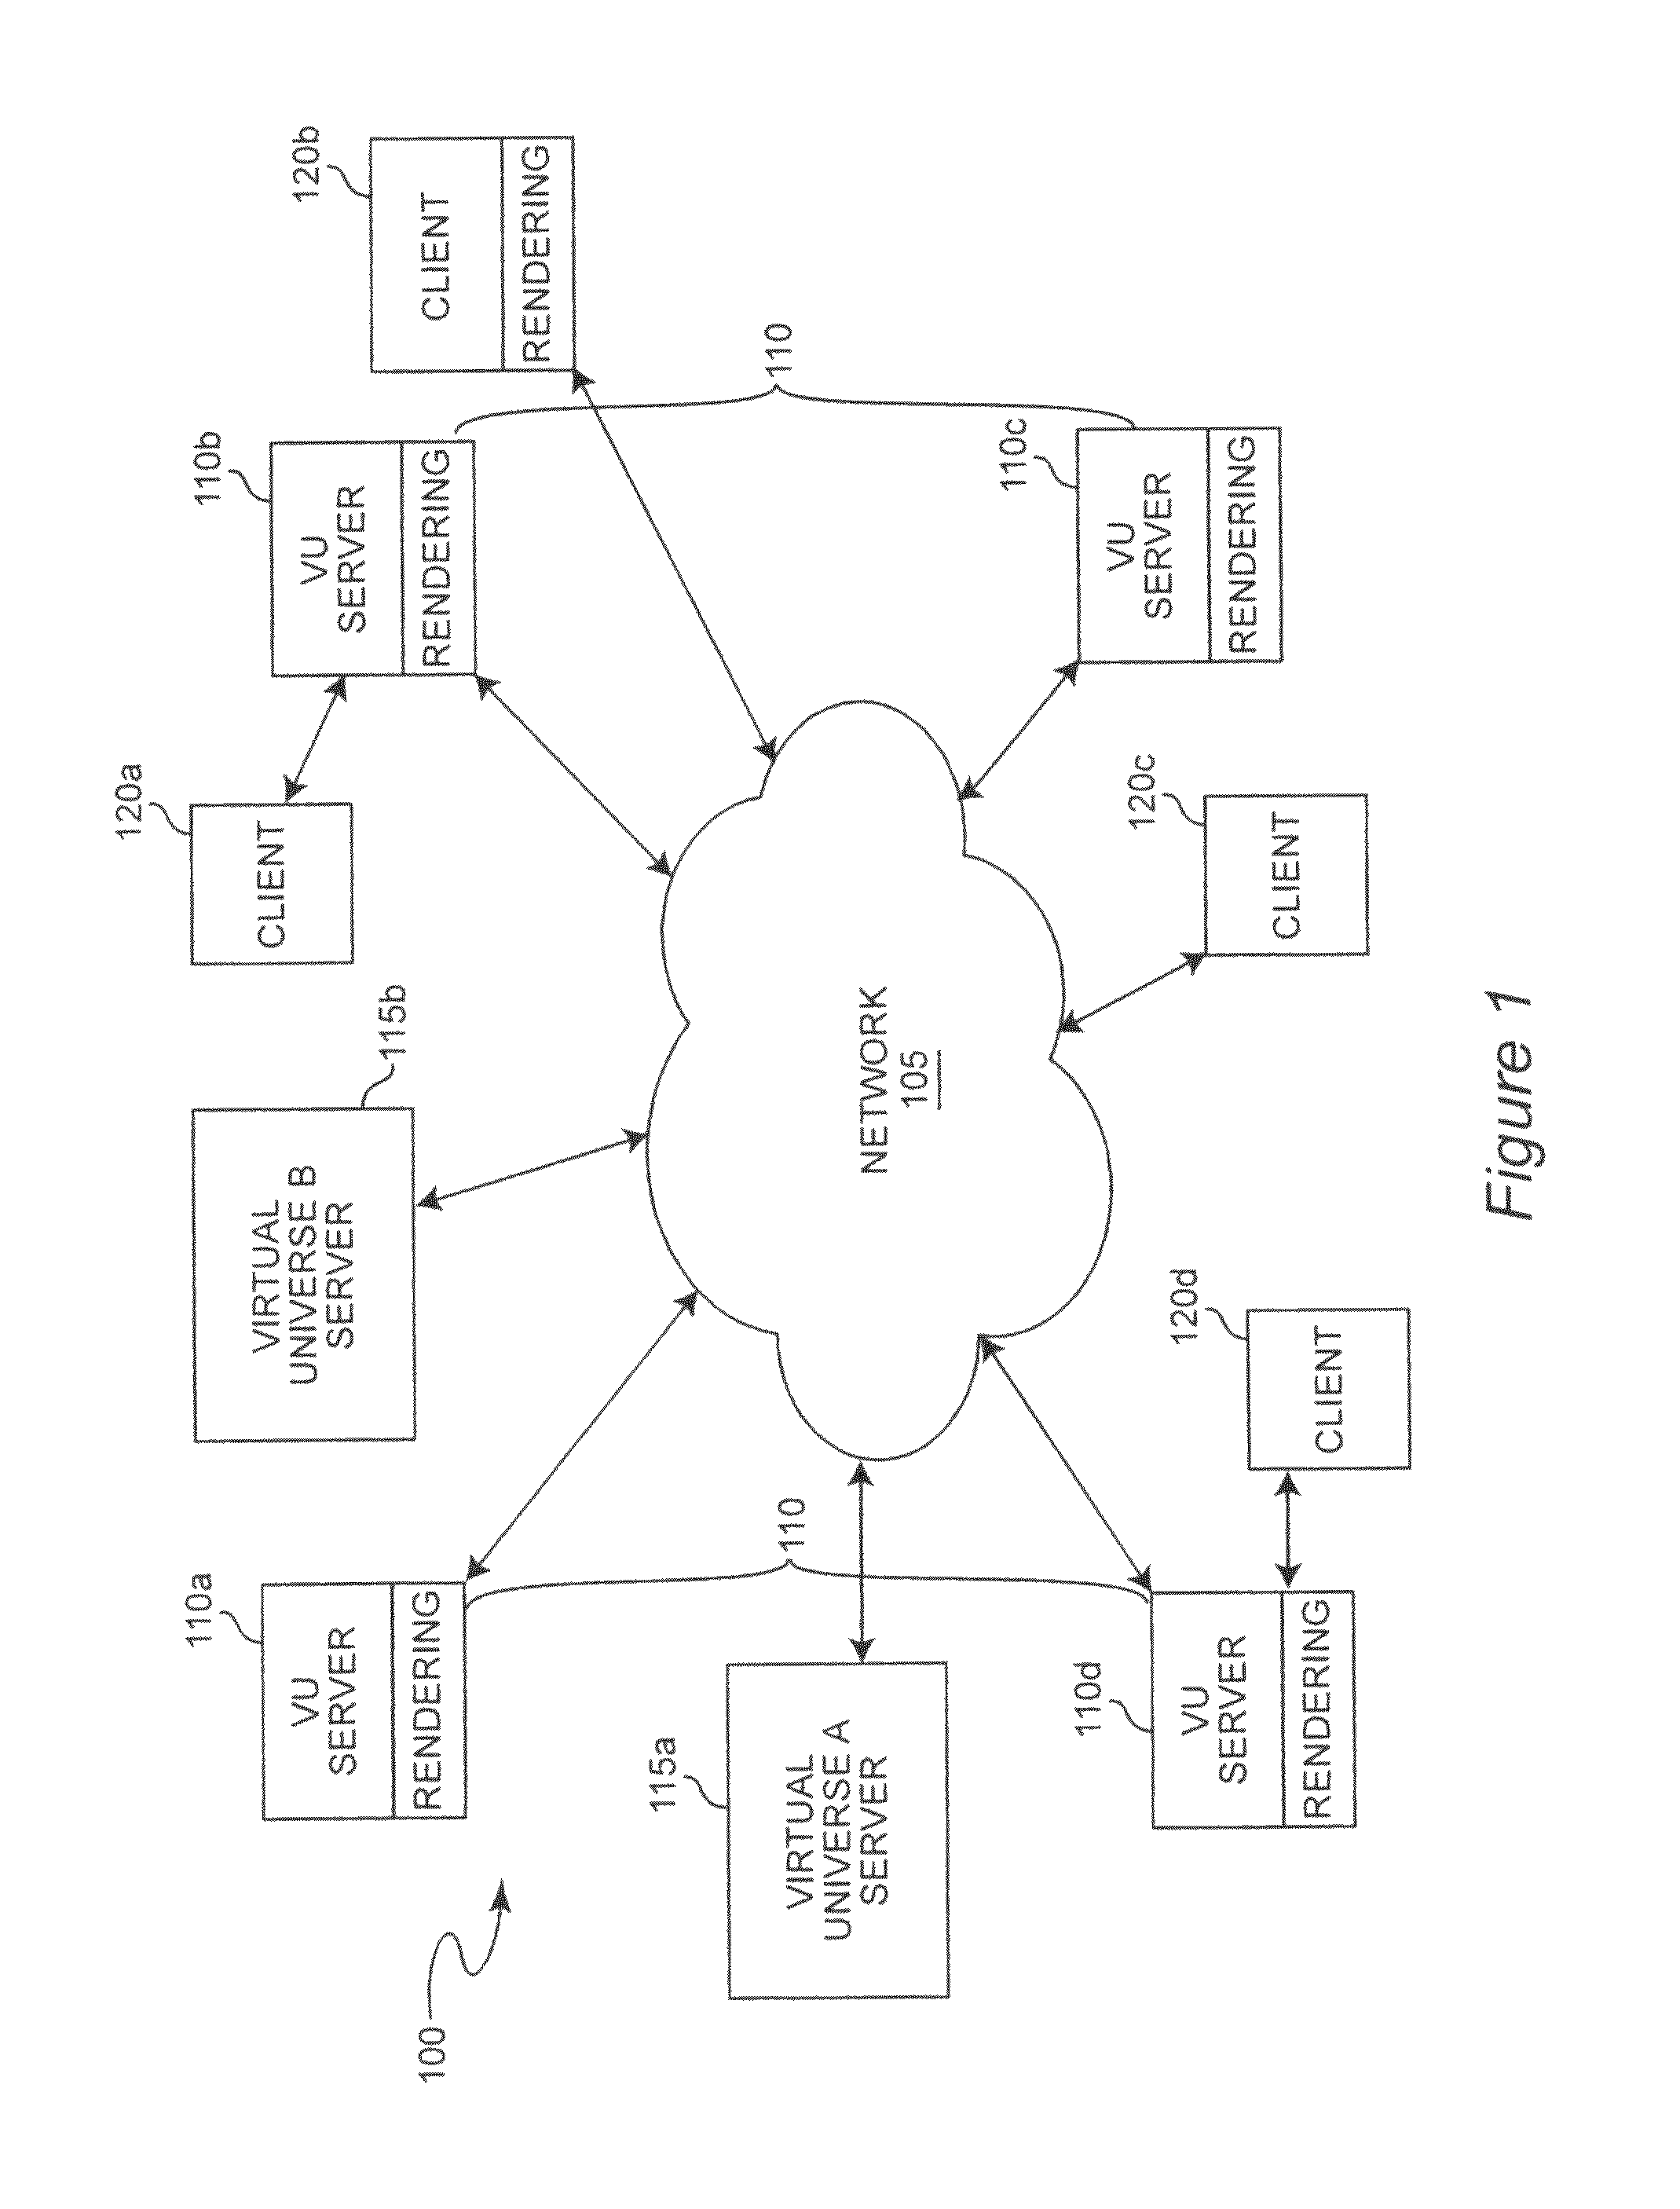 System and method for using partial teleportation or relocation in virtual worlds